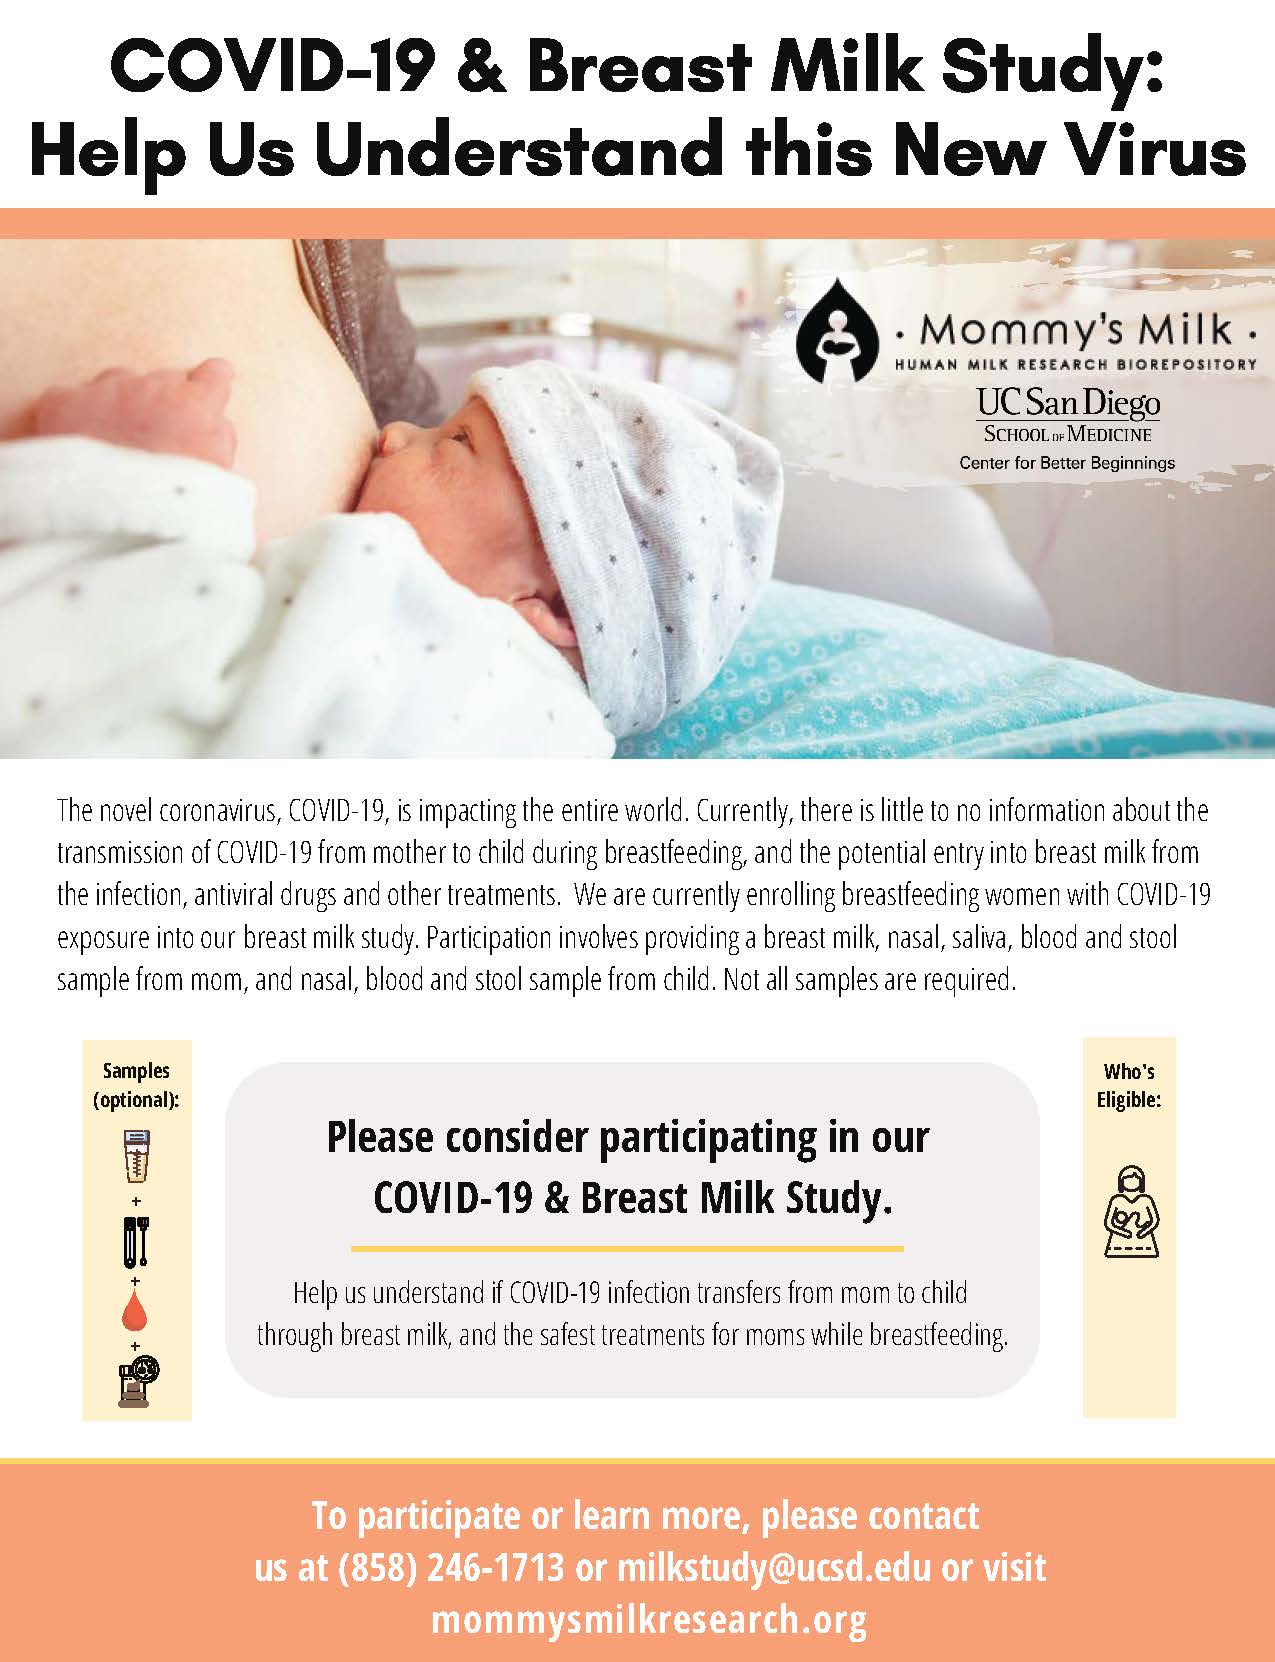 Download the Study Flyer